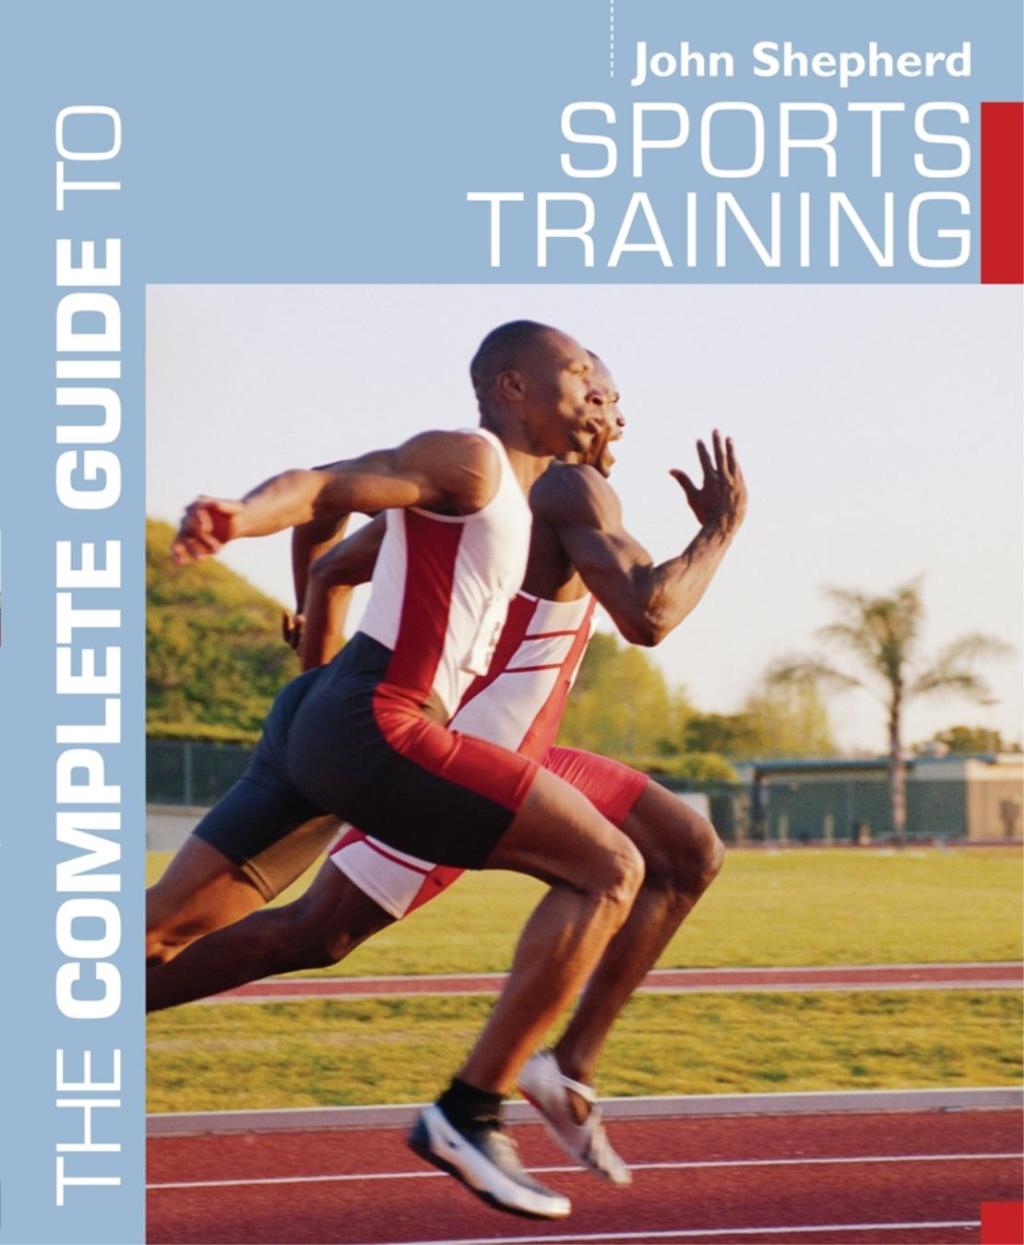 The Complete Guide to Sports Training (eBook) - John Shepherd